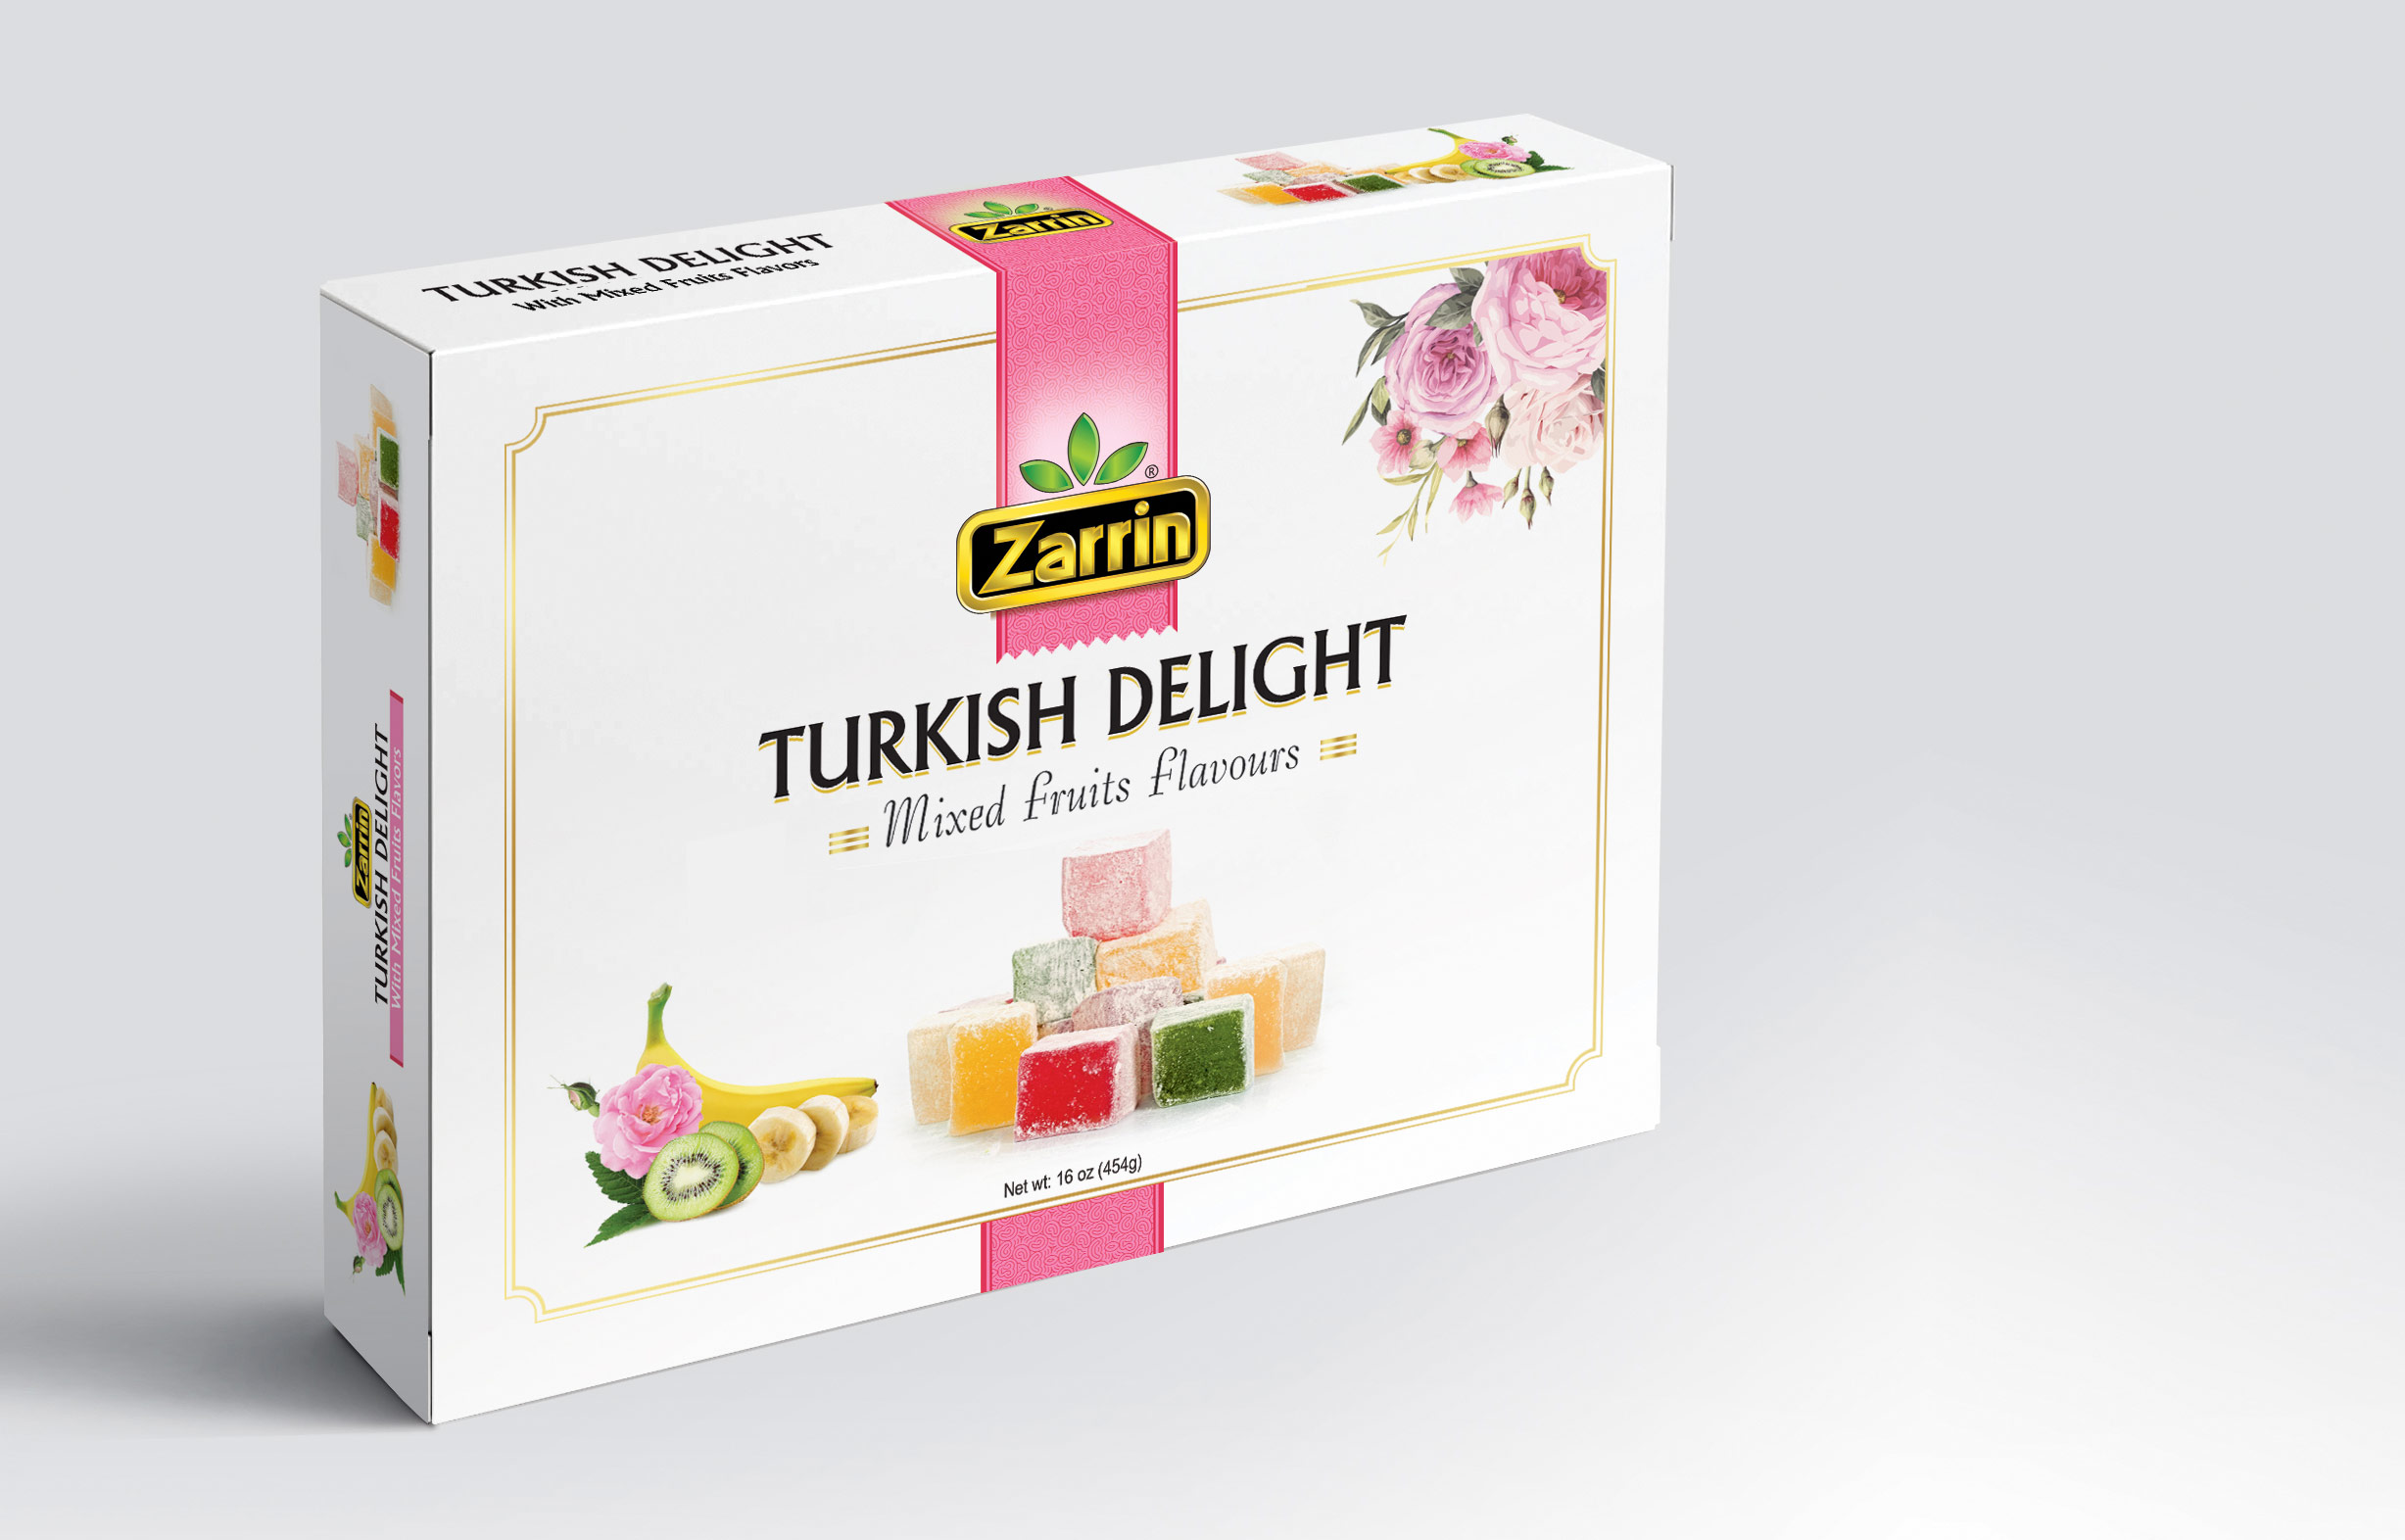 Zarrin Mixed Fruits Flavours Turkish Delight 16oz box.